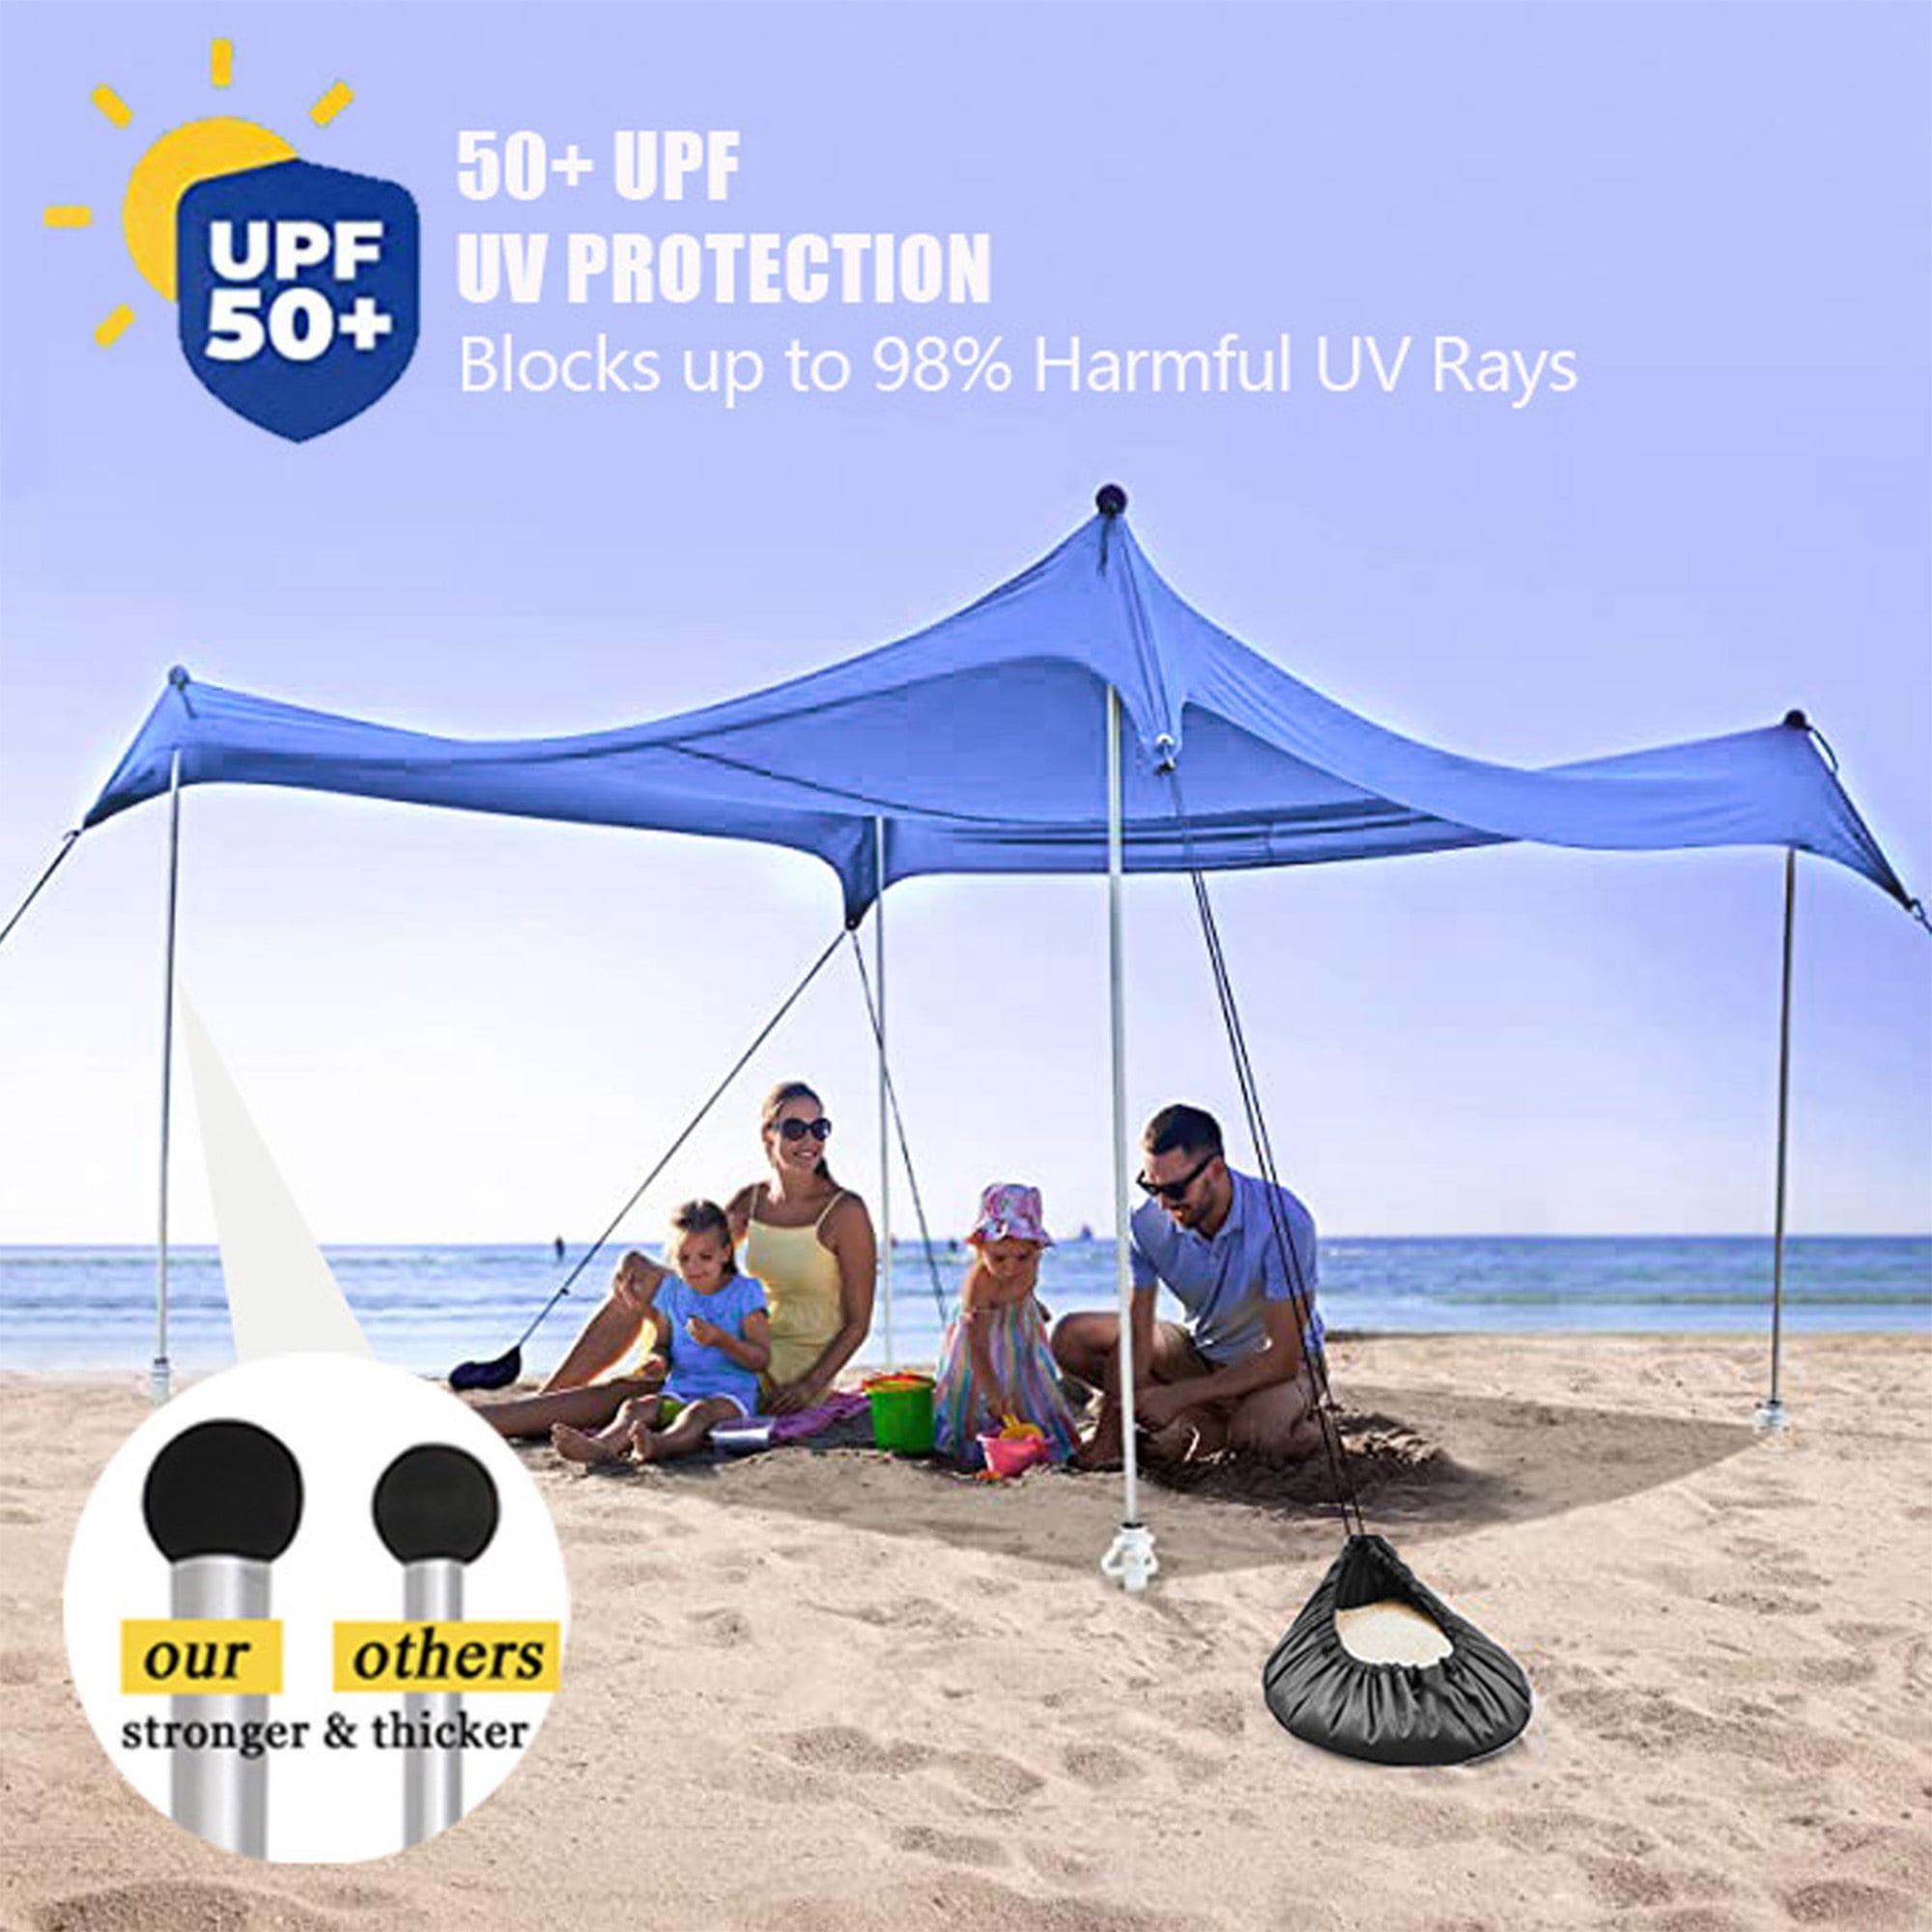 Beach Canopy Tent Sun Shelter, VECUKTY 10x10 Ft Camping Sun Shade for Beach  with UPF 50+ Protection,Turquoise 